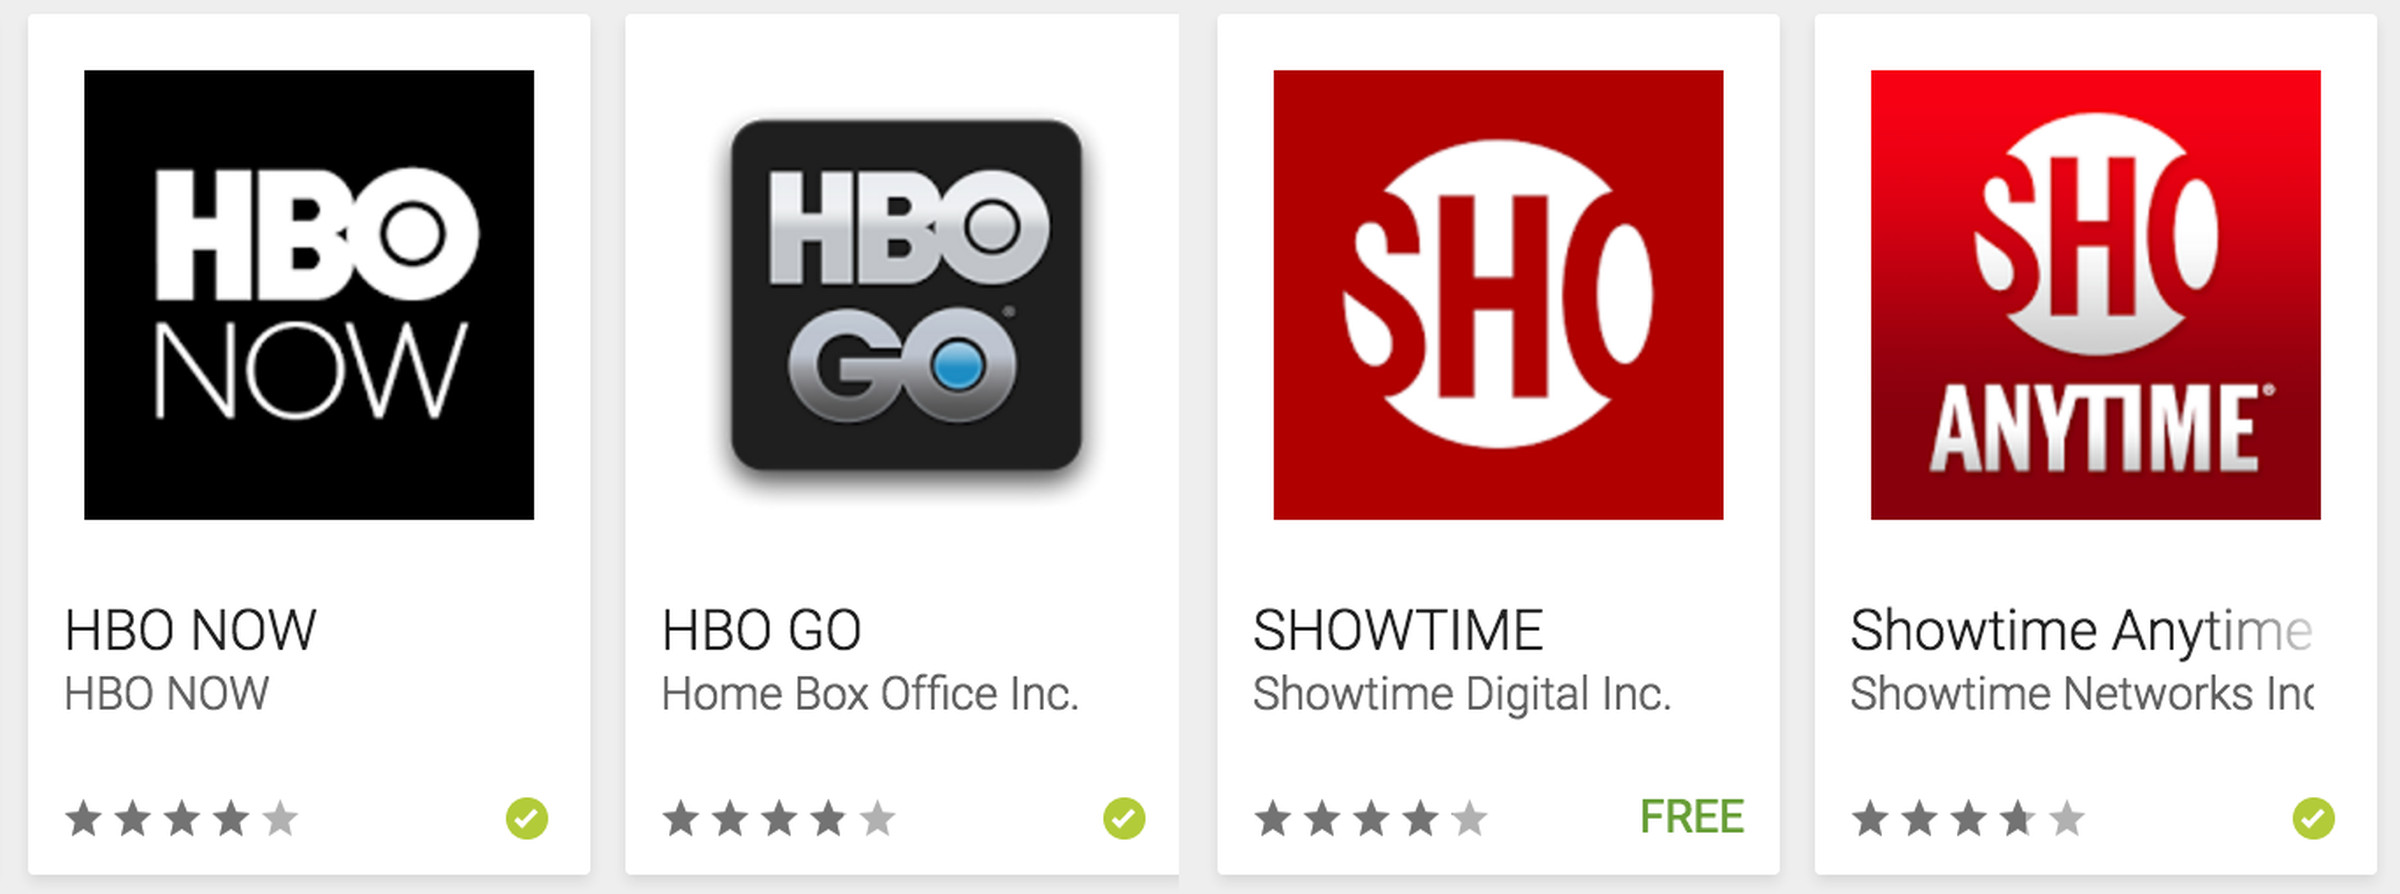 HBO Showtime apps